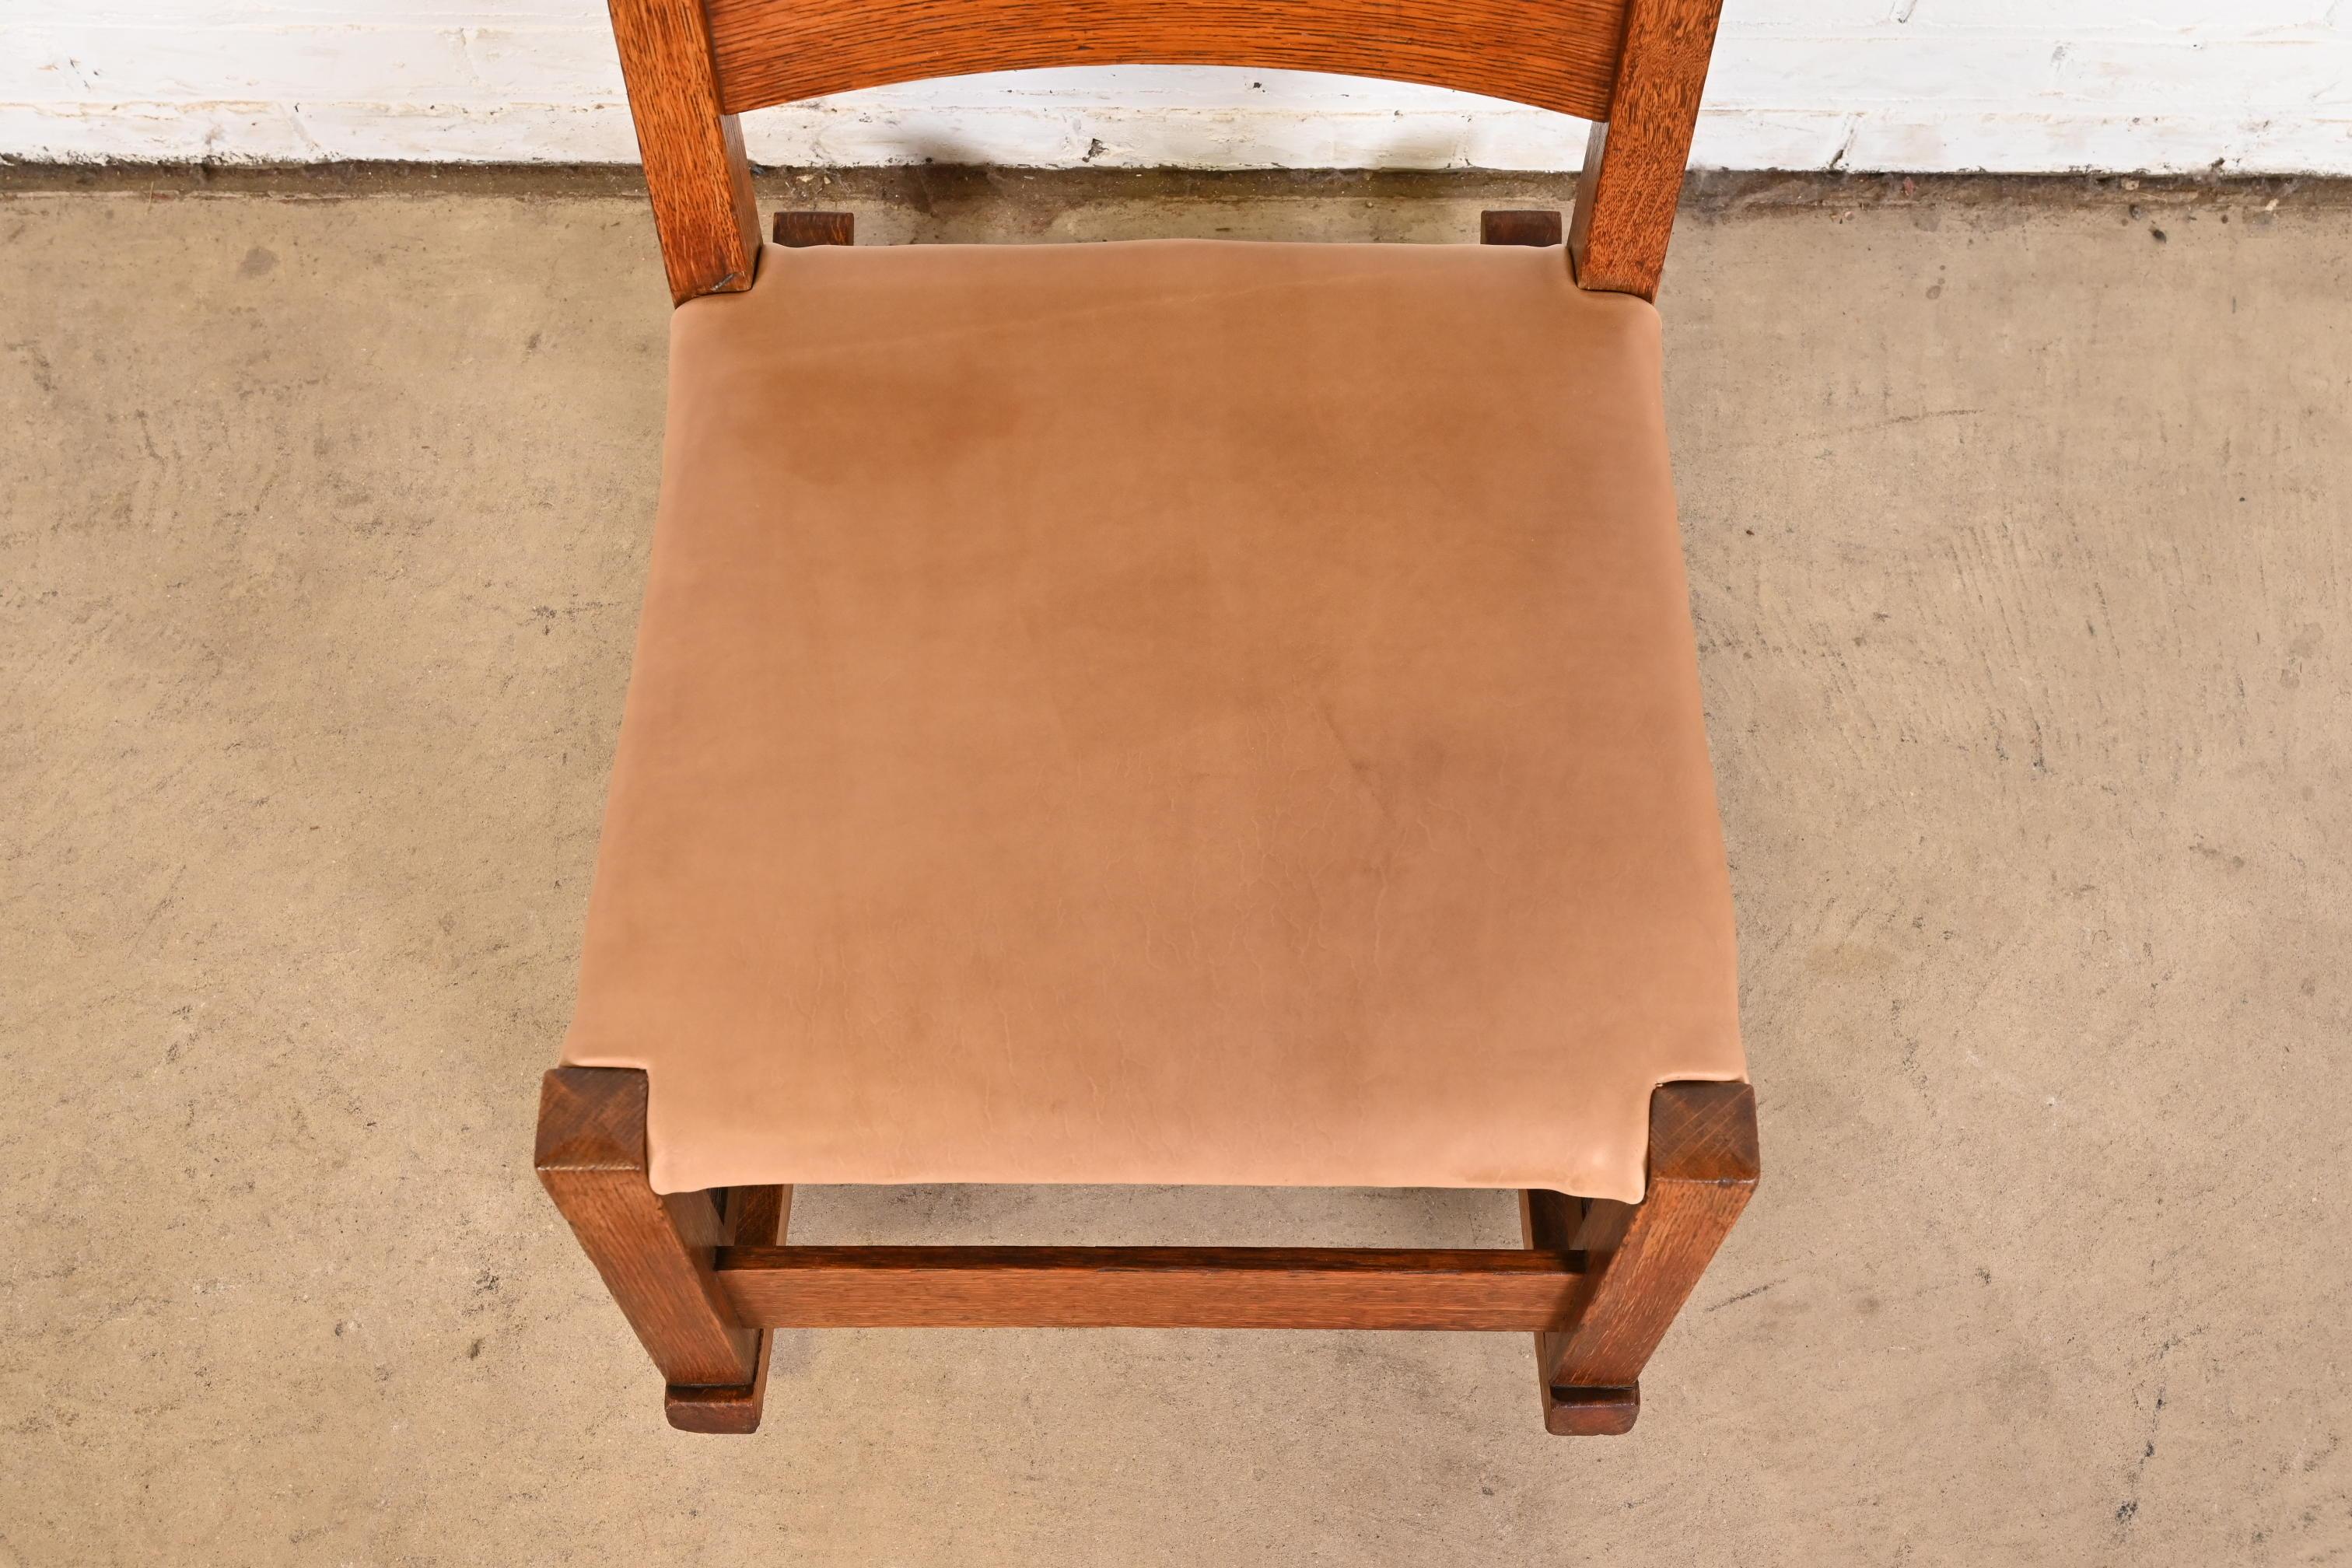 Leather Gustav Stickley Mission Oak Arts & Crafts Sewing Rocking Chair, Circa 1900 For Sale